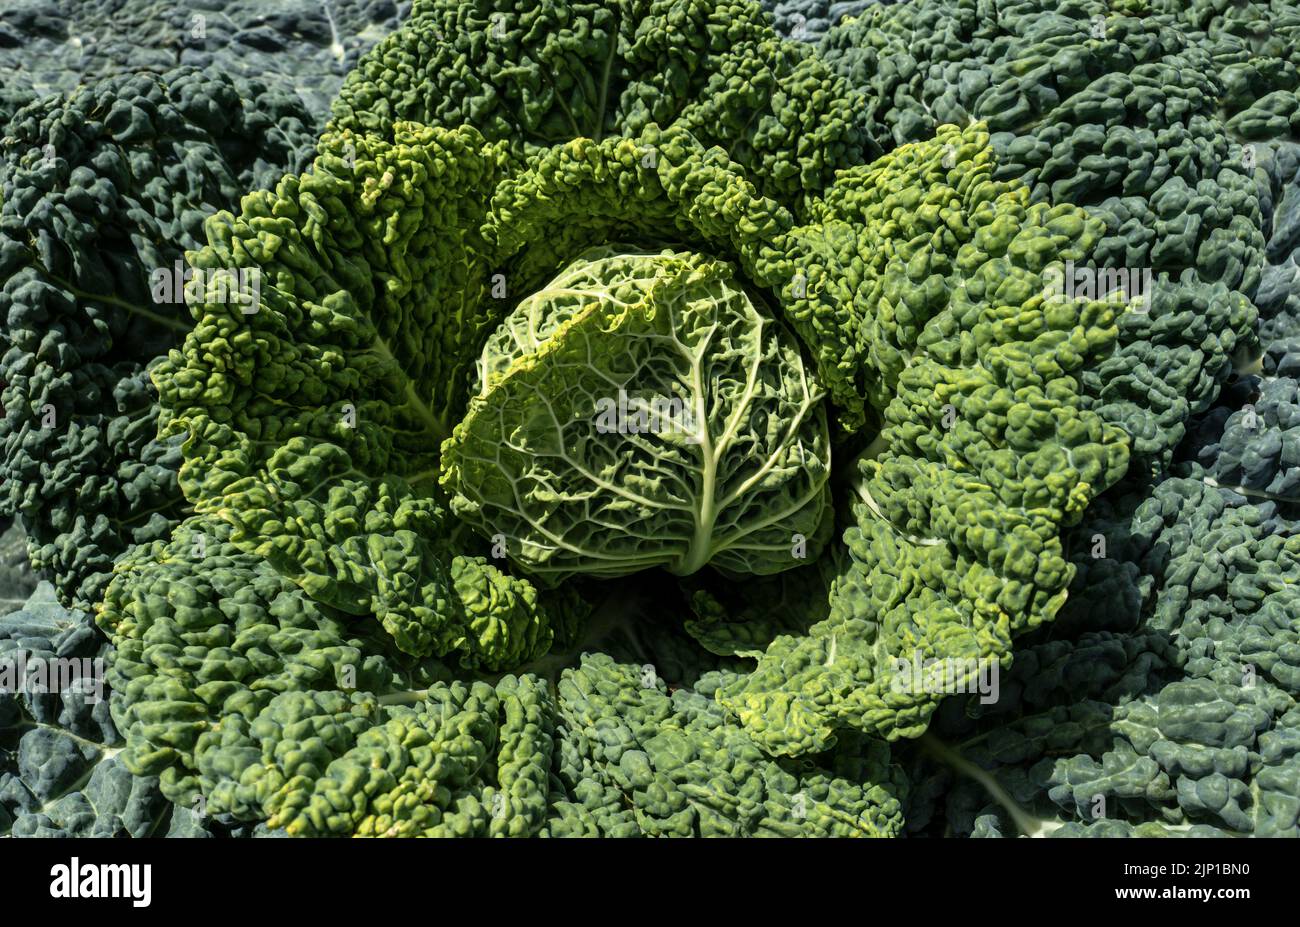 Growing savoy cabbage in close-up Stock Photo